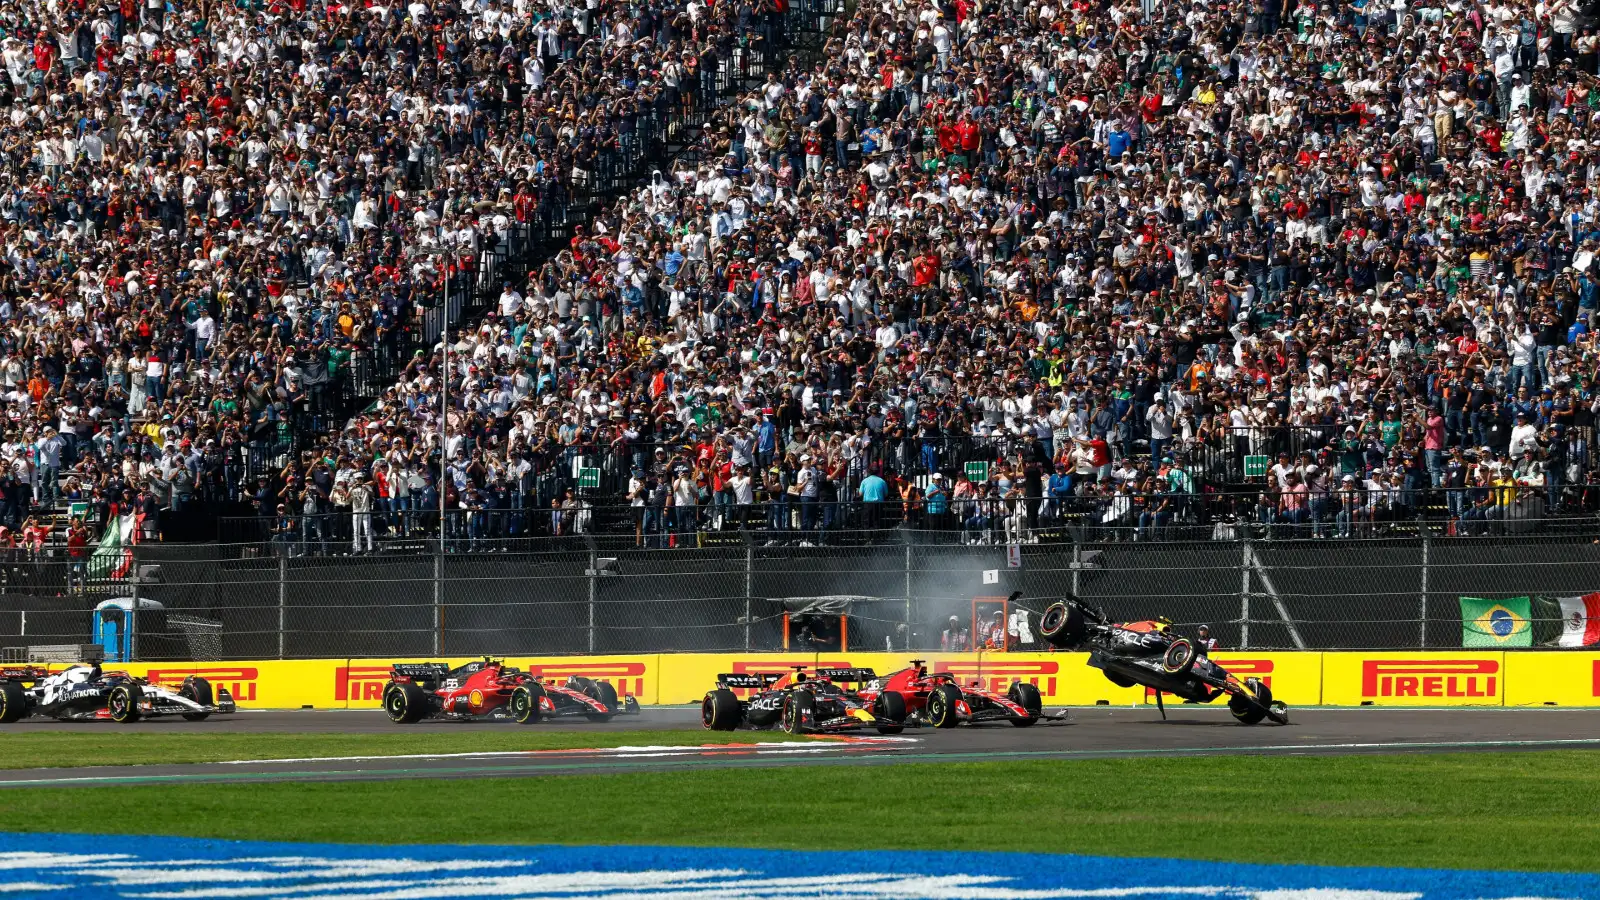 Sergio Perez sails into the air after his Red Bull makes contact with Ferrari's Charles Leclerc in the Mexican Grand Prix.